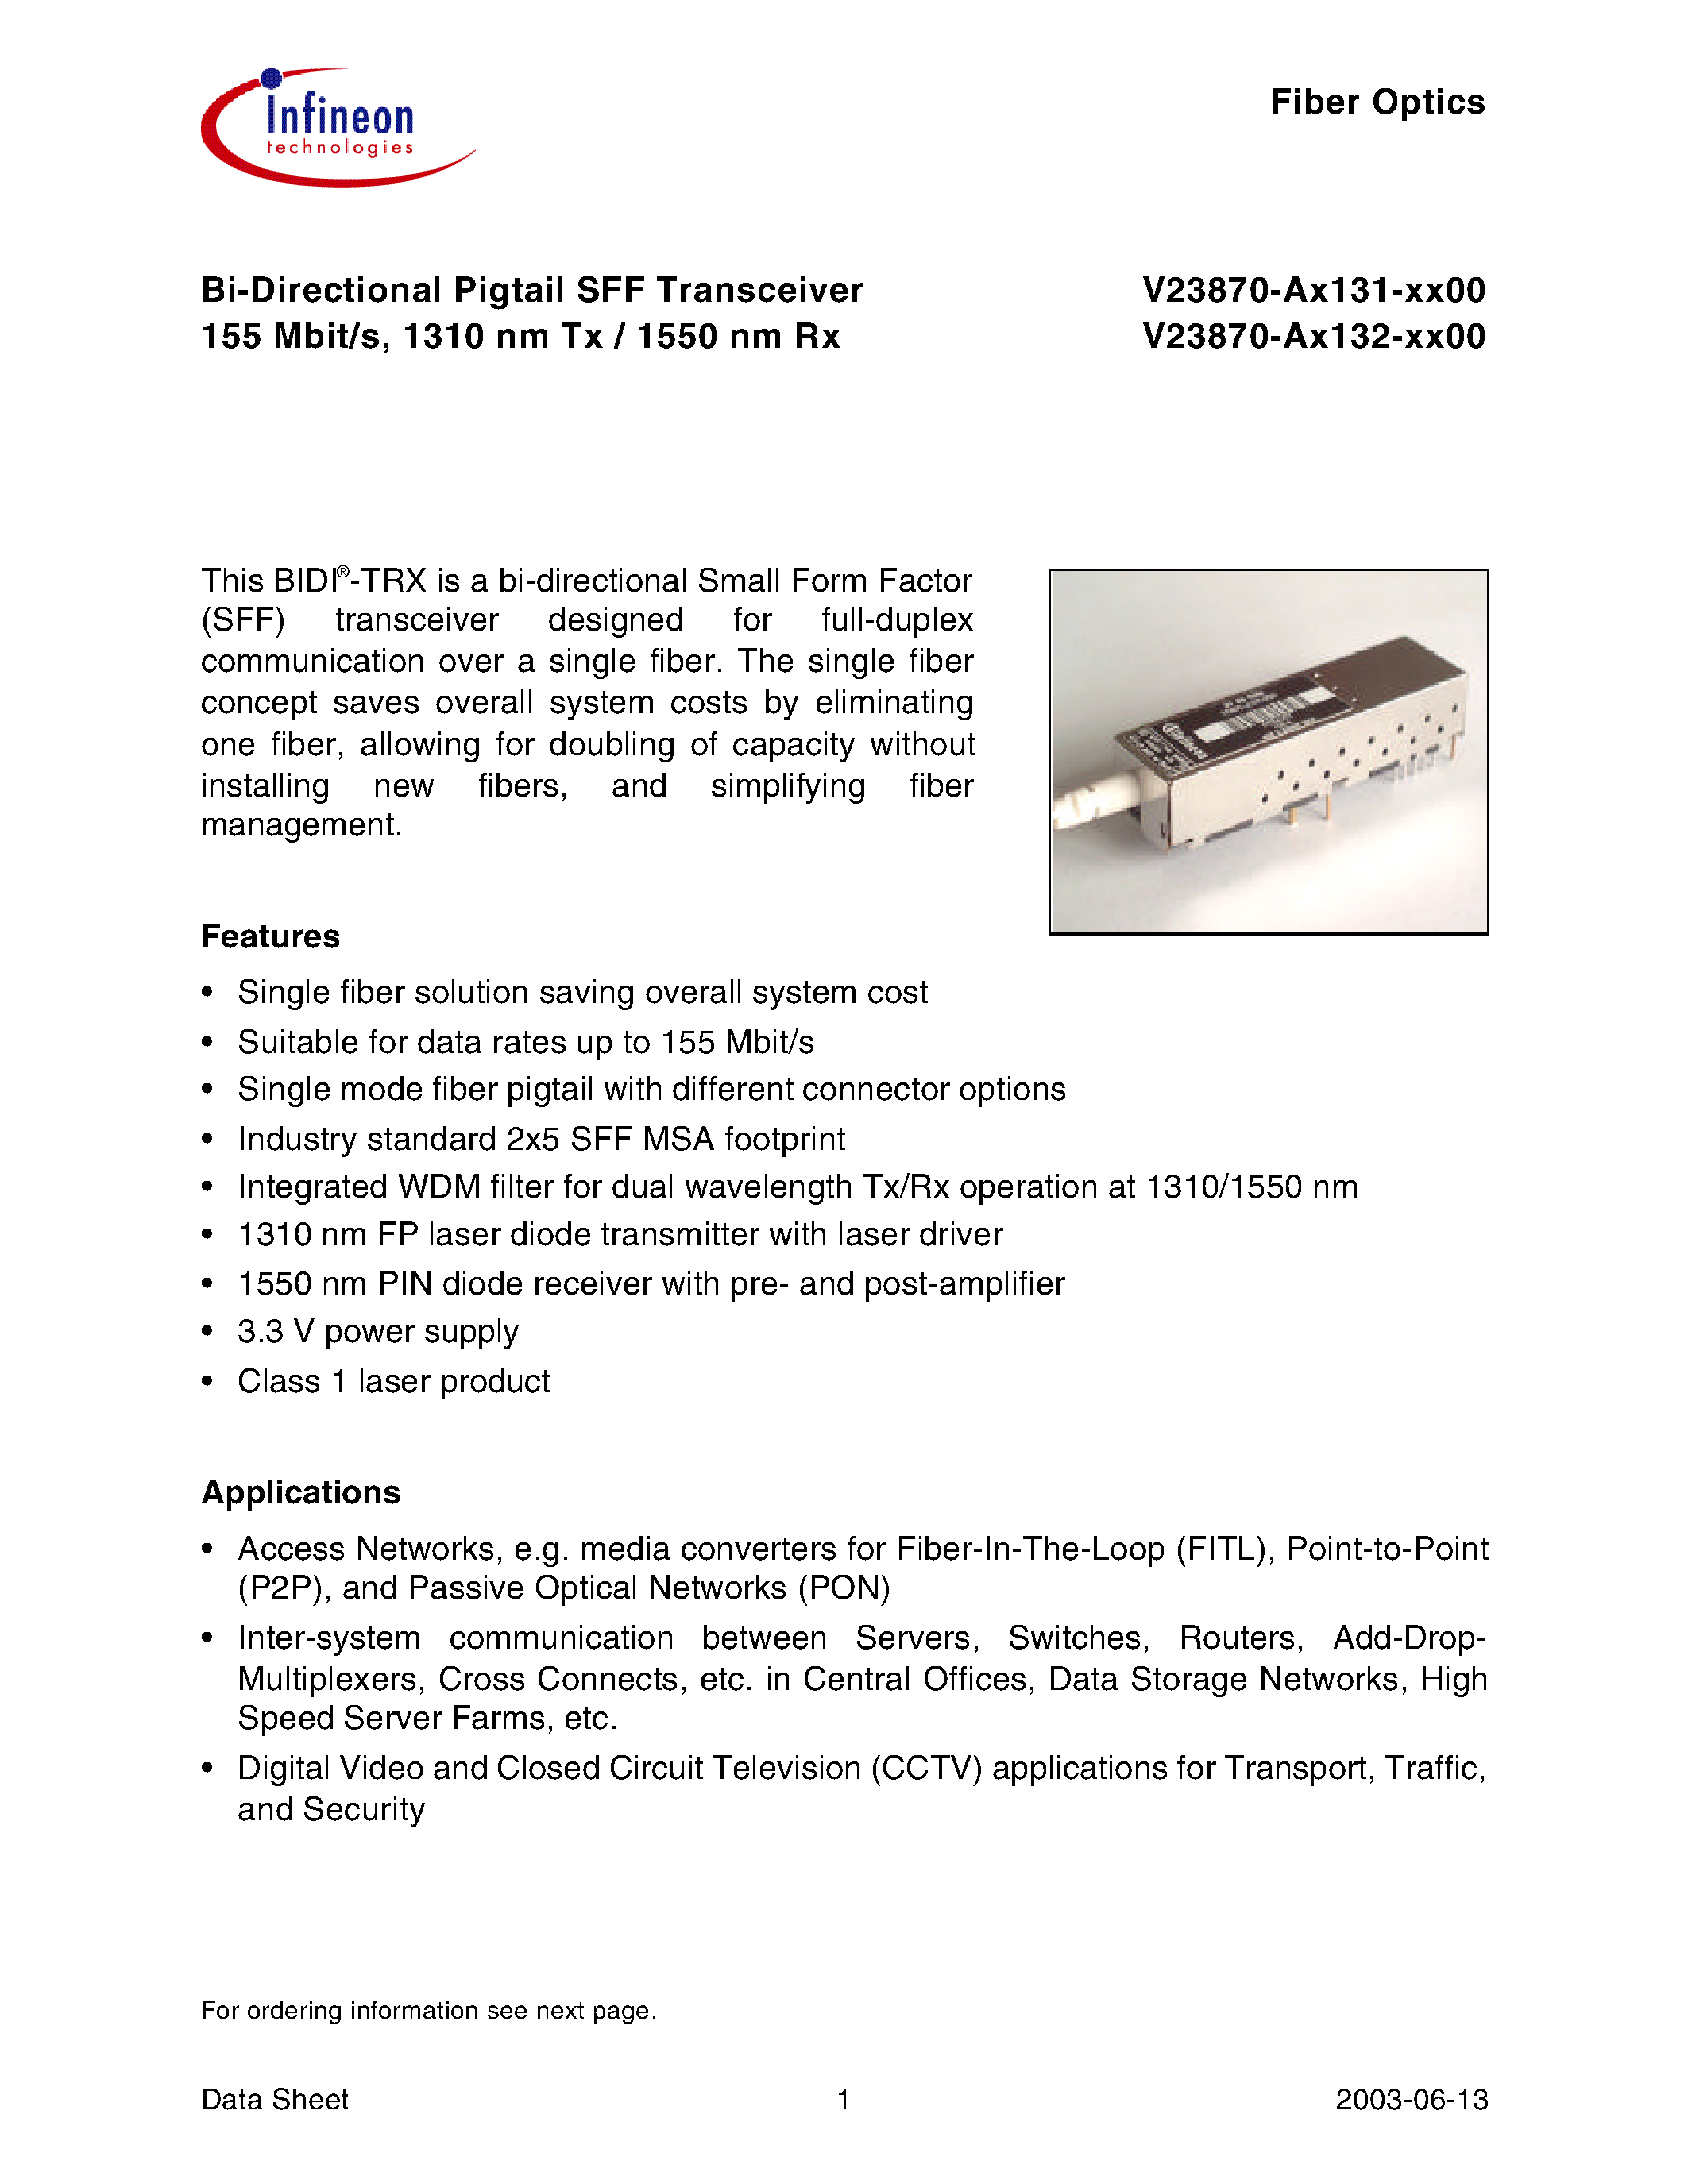 Datasheet V23870-A3131-H500 - Bi-Directional Pigtail SFF Transceiver 155 Mbit/s/ 1310 nm Tx / 1550 nm Rx page 1